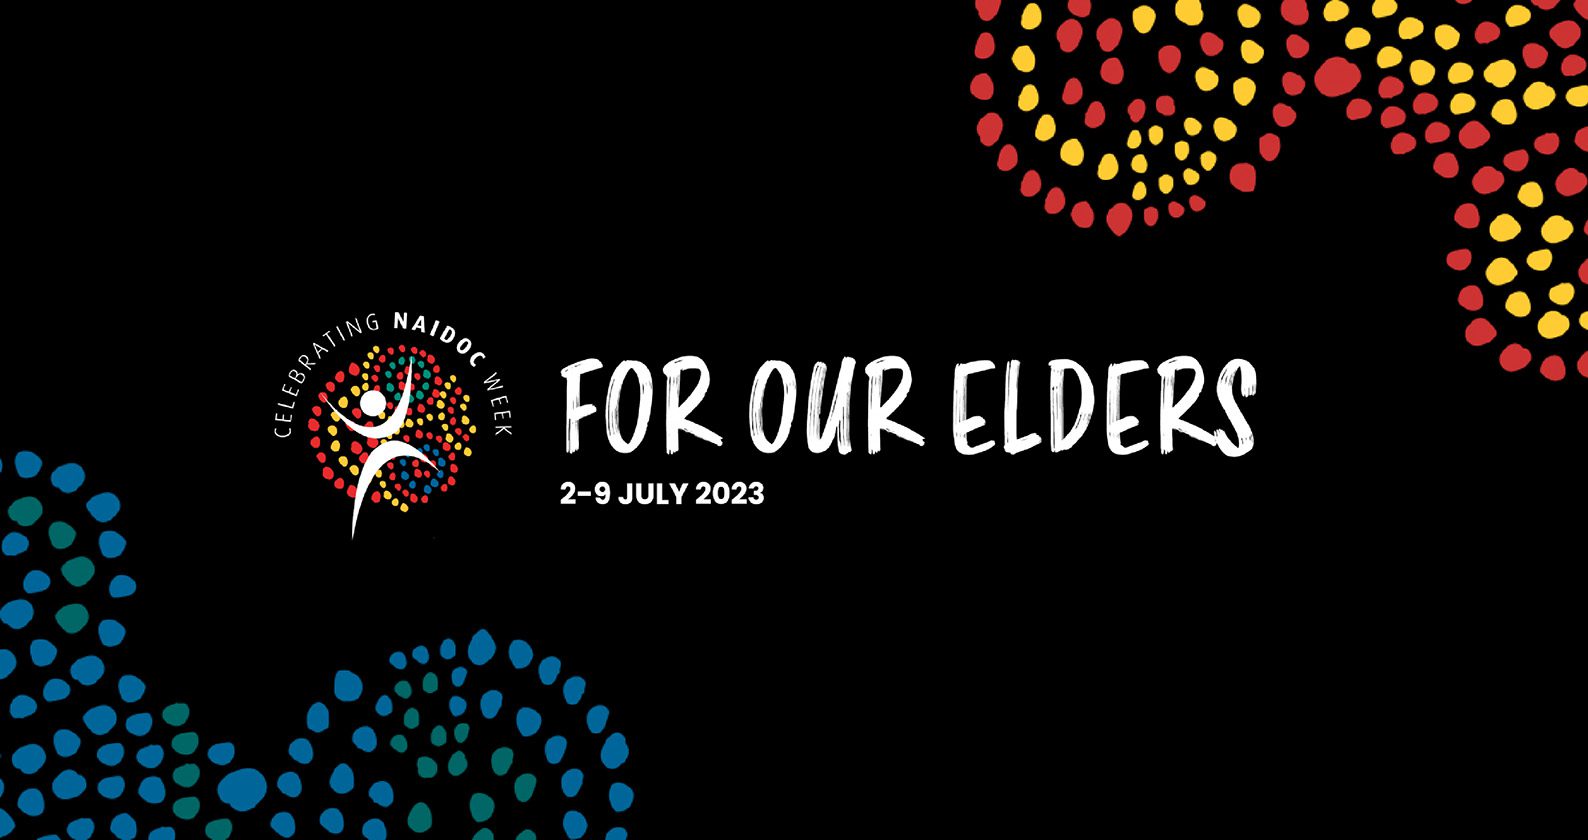 Image for NAIDOC 2023: For Our Elders